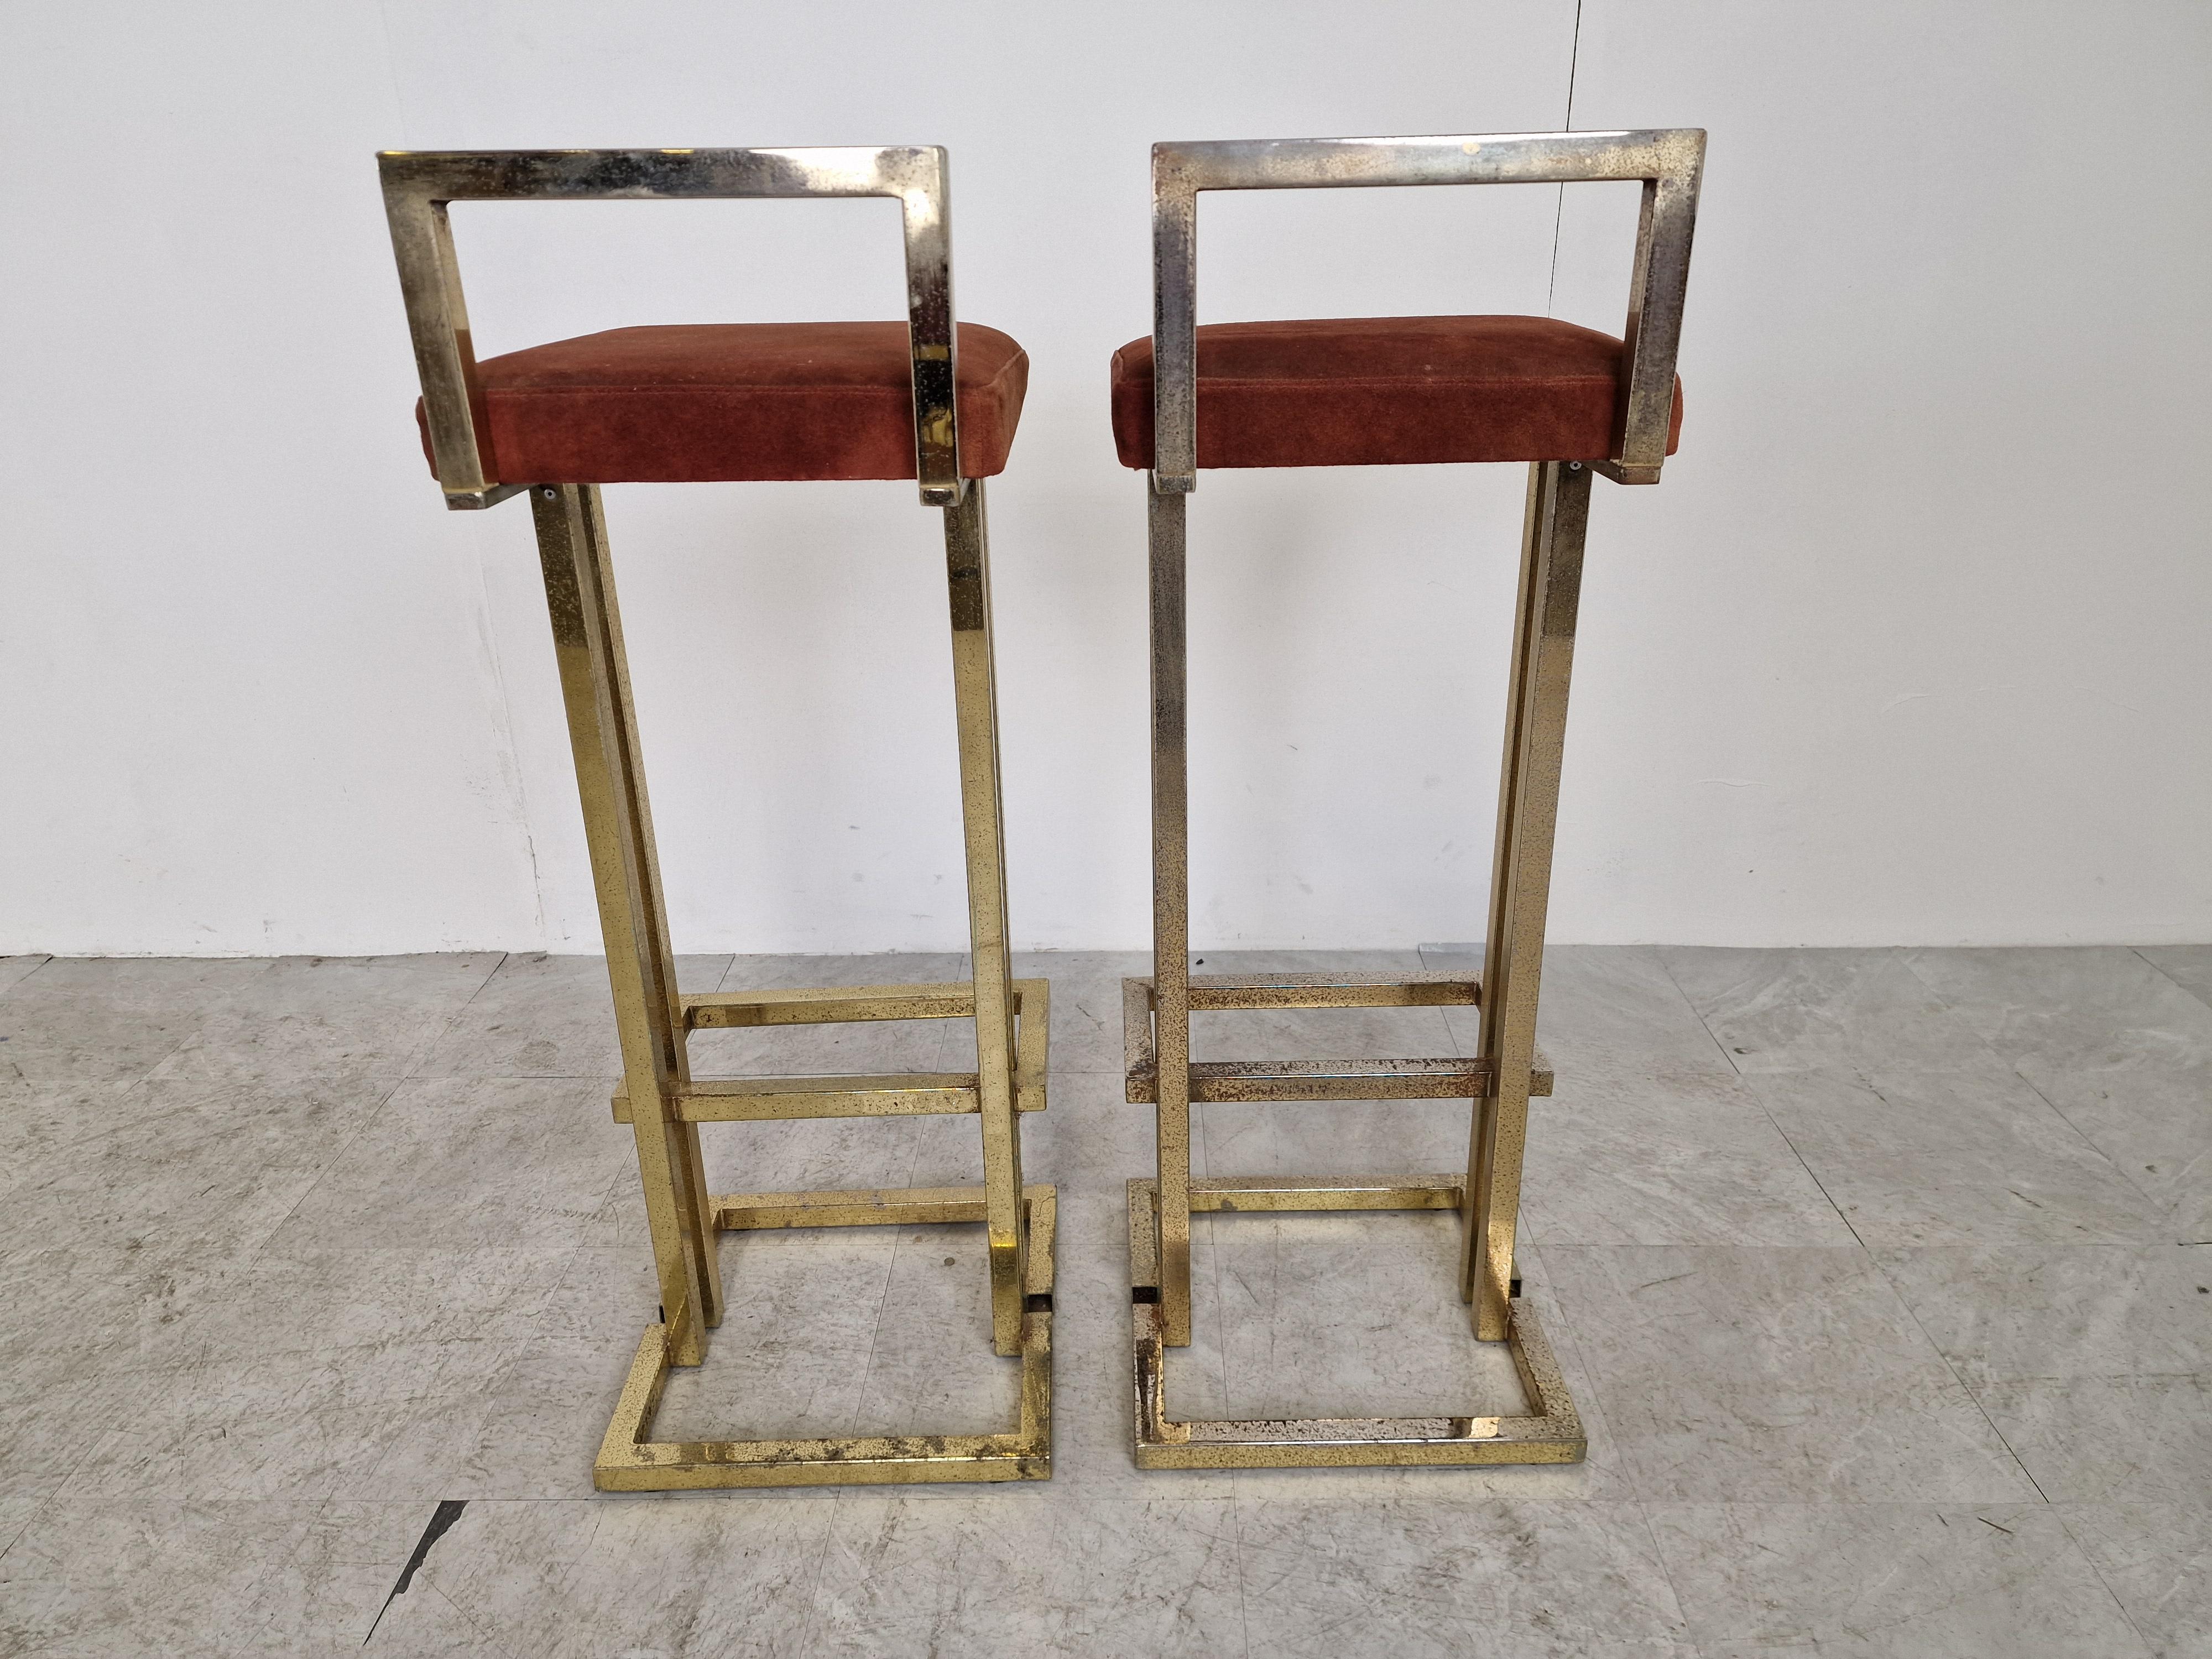 Beautiful original brass and suede bar stools by Belgochrom.

Beautiful timeless design with a luxury appeal.

They have their original brown suede upholstery.

Good overall condition. Frame has some patina/wear but still looks great.

1970s